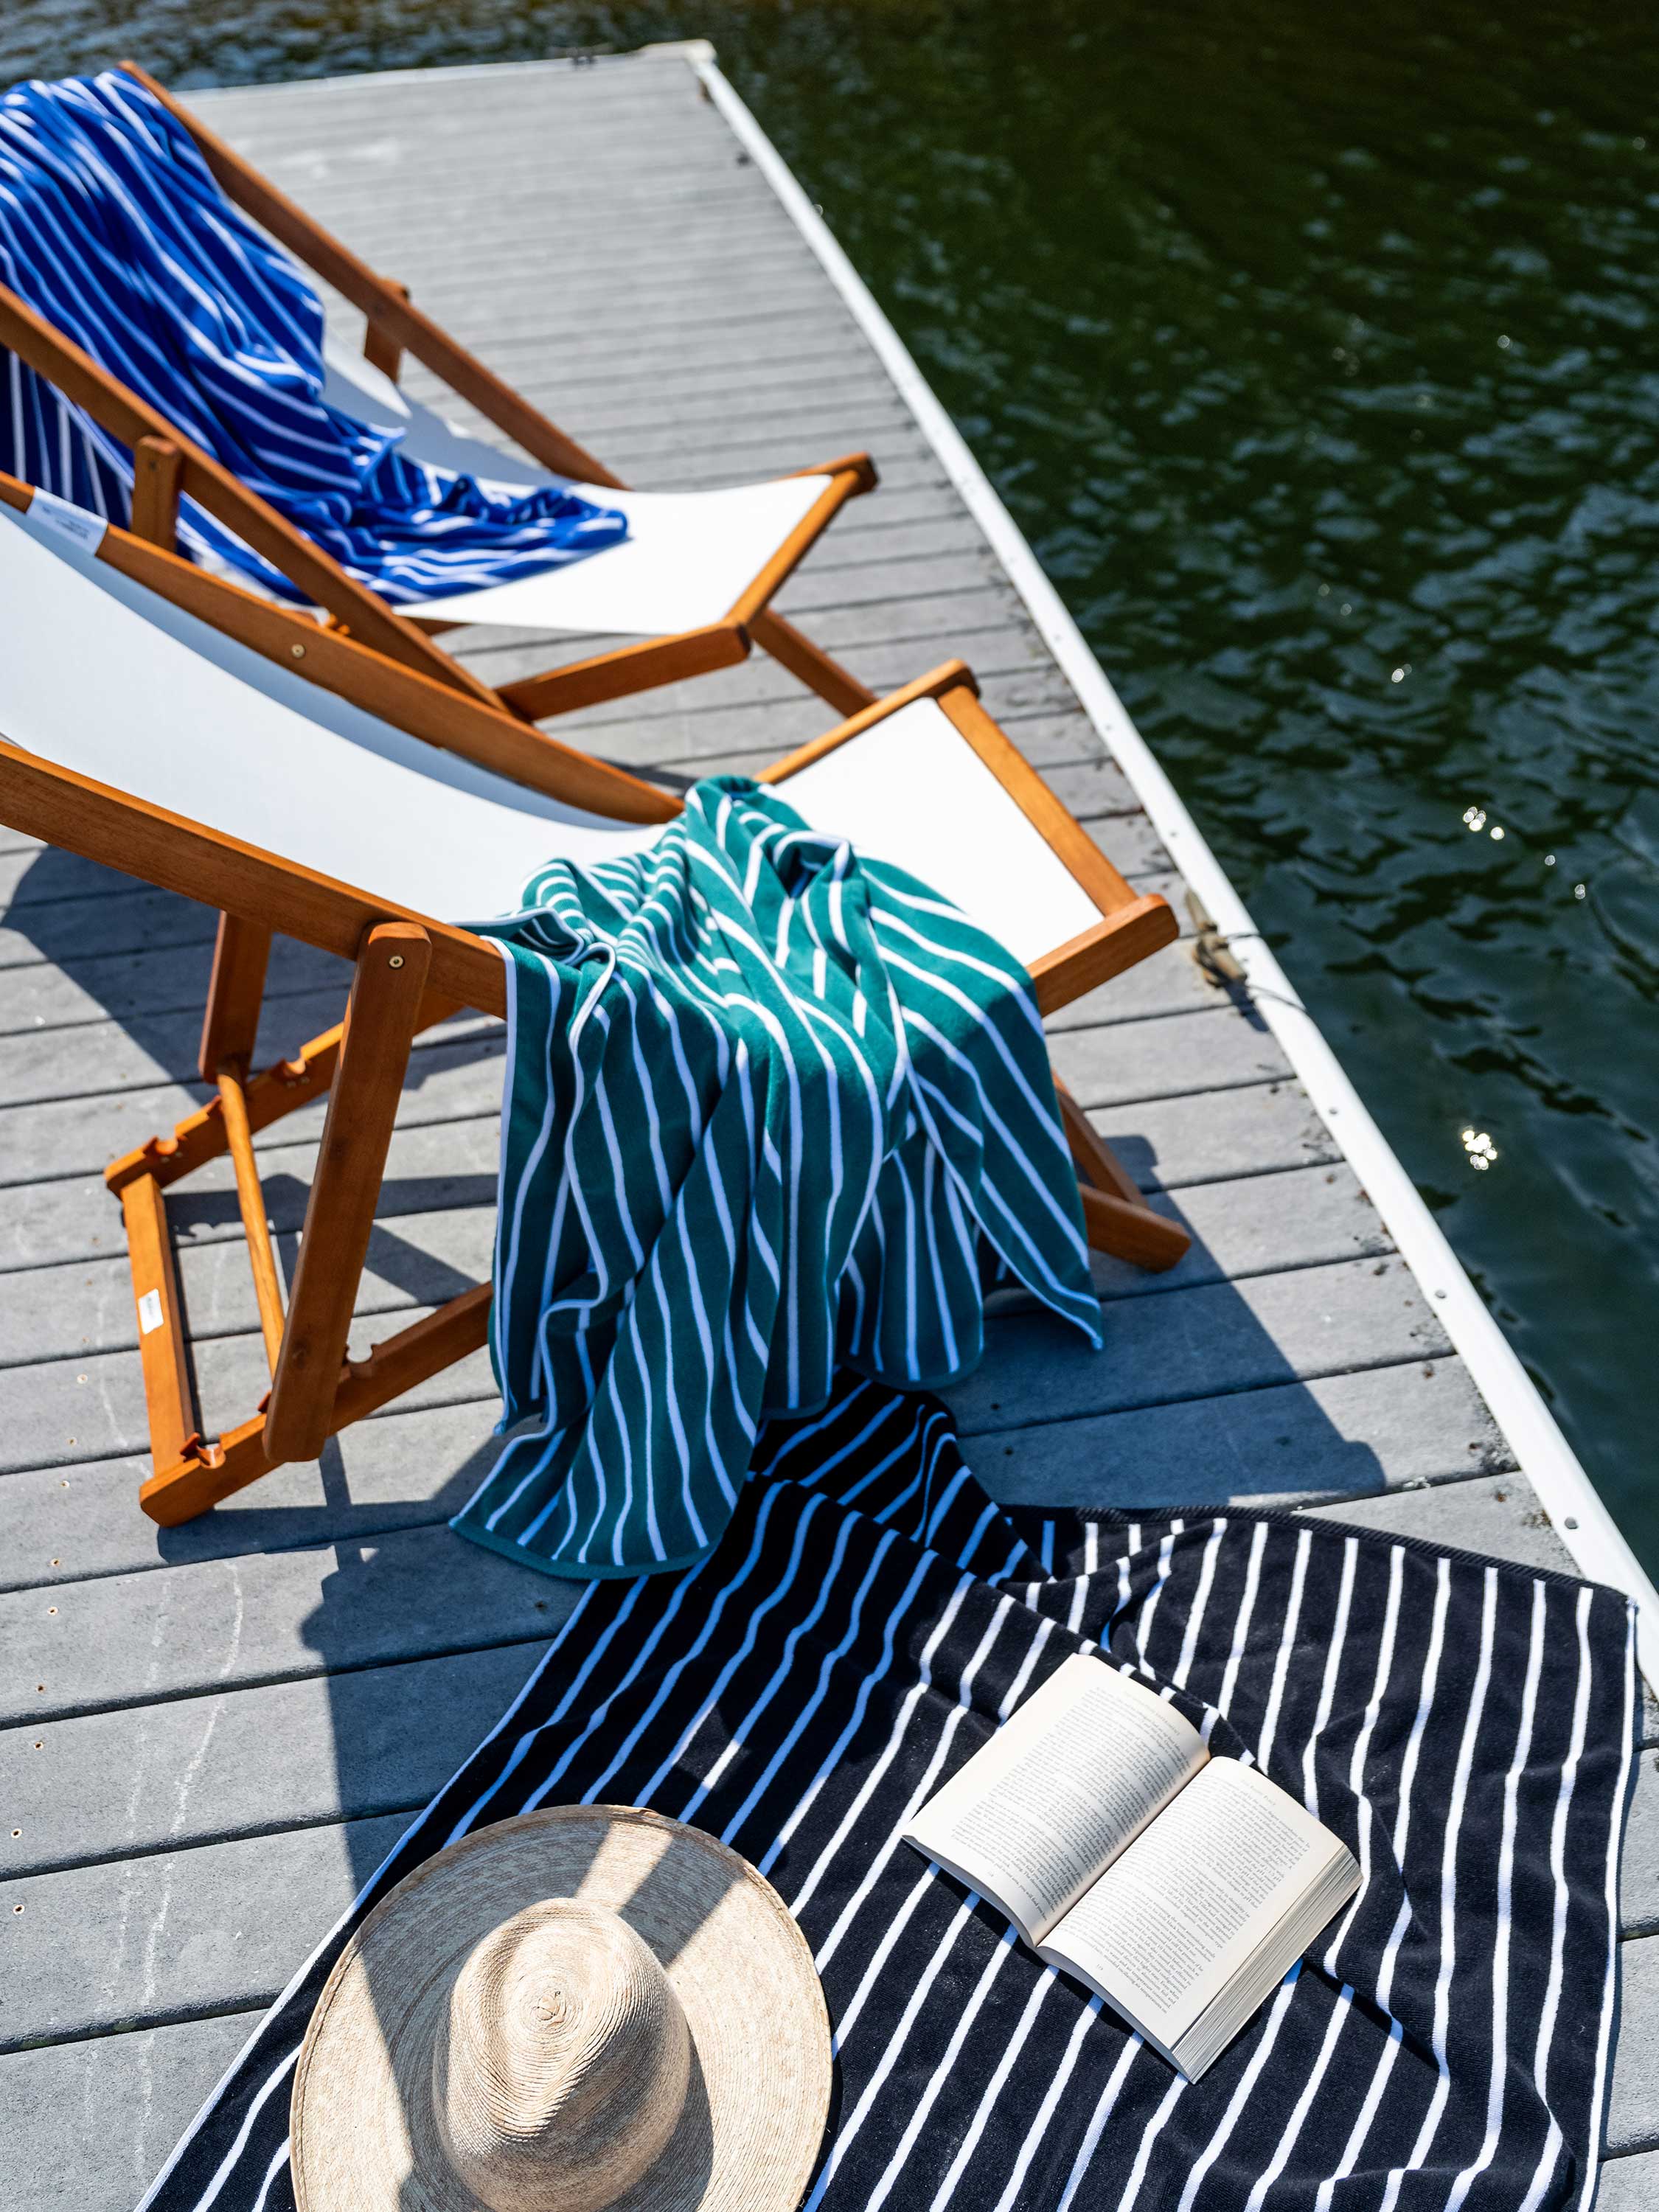  Teal and White Oversized Beach Towel - XL Cabana Striped Beach  Towels for Adults and Cute Pool Towels Oversized - Lightweight Extra Large  Beach Towel and Quick Dry Beach Towel with